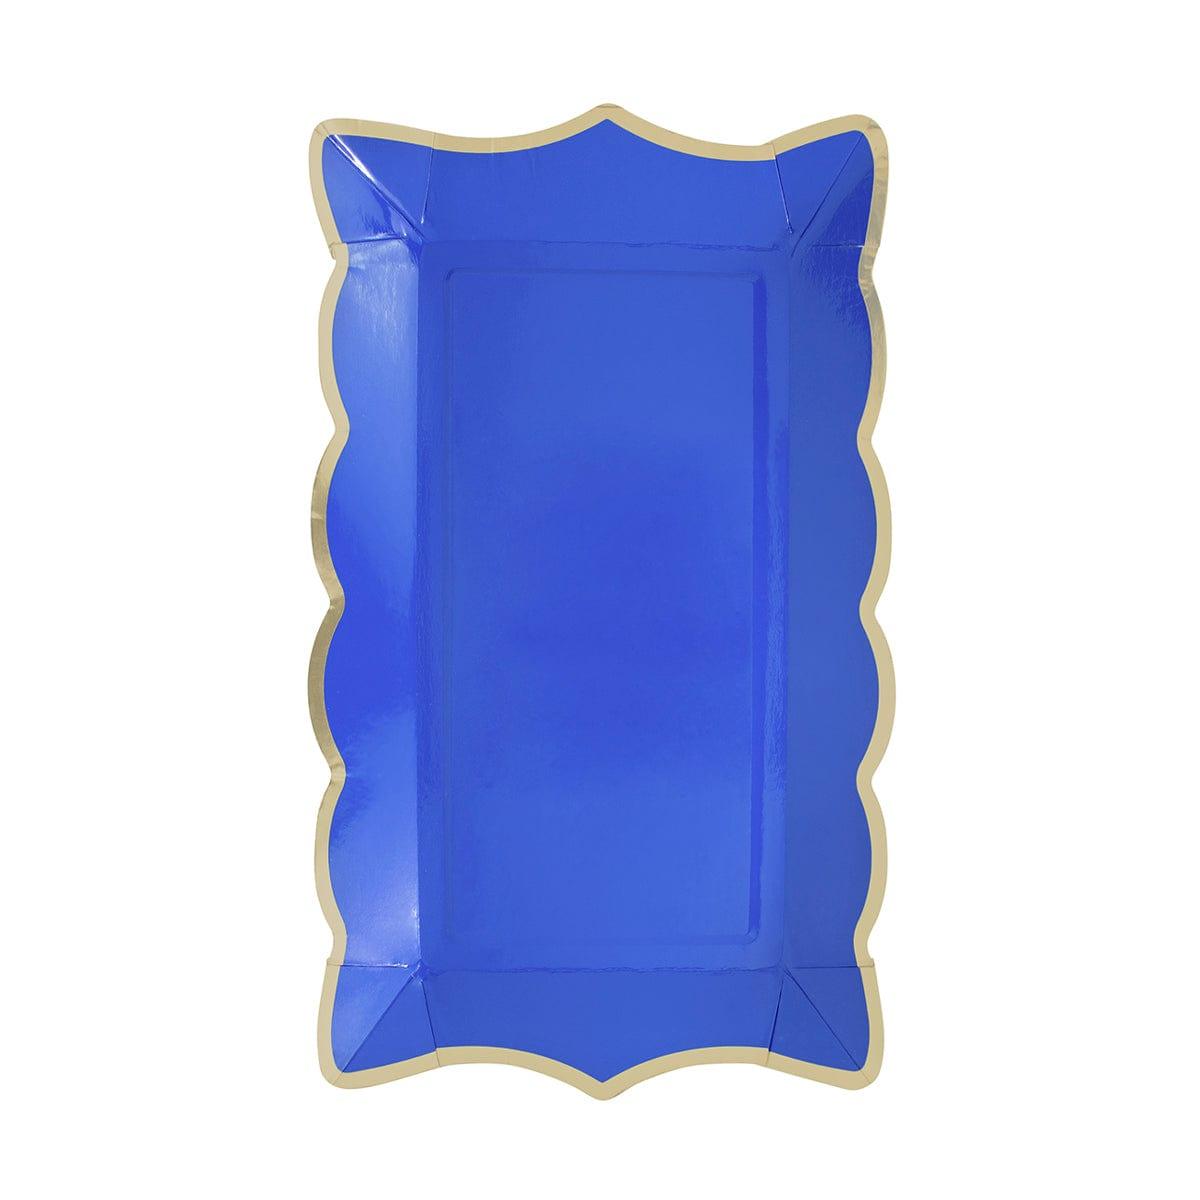 YIWU SANDY PAPER PRODUCTS CO., LTD Everyday Entertaining Royal Blue Rectangular Trays, 9 Inches, 4 Count